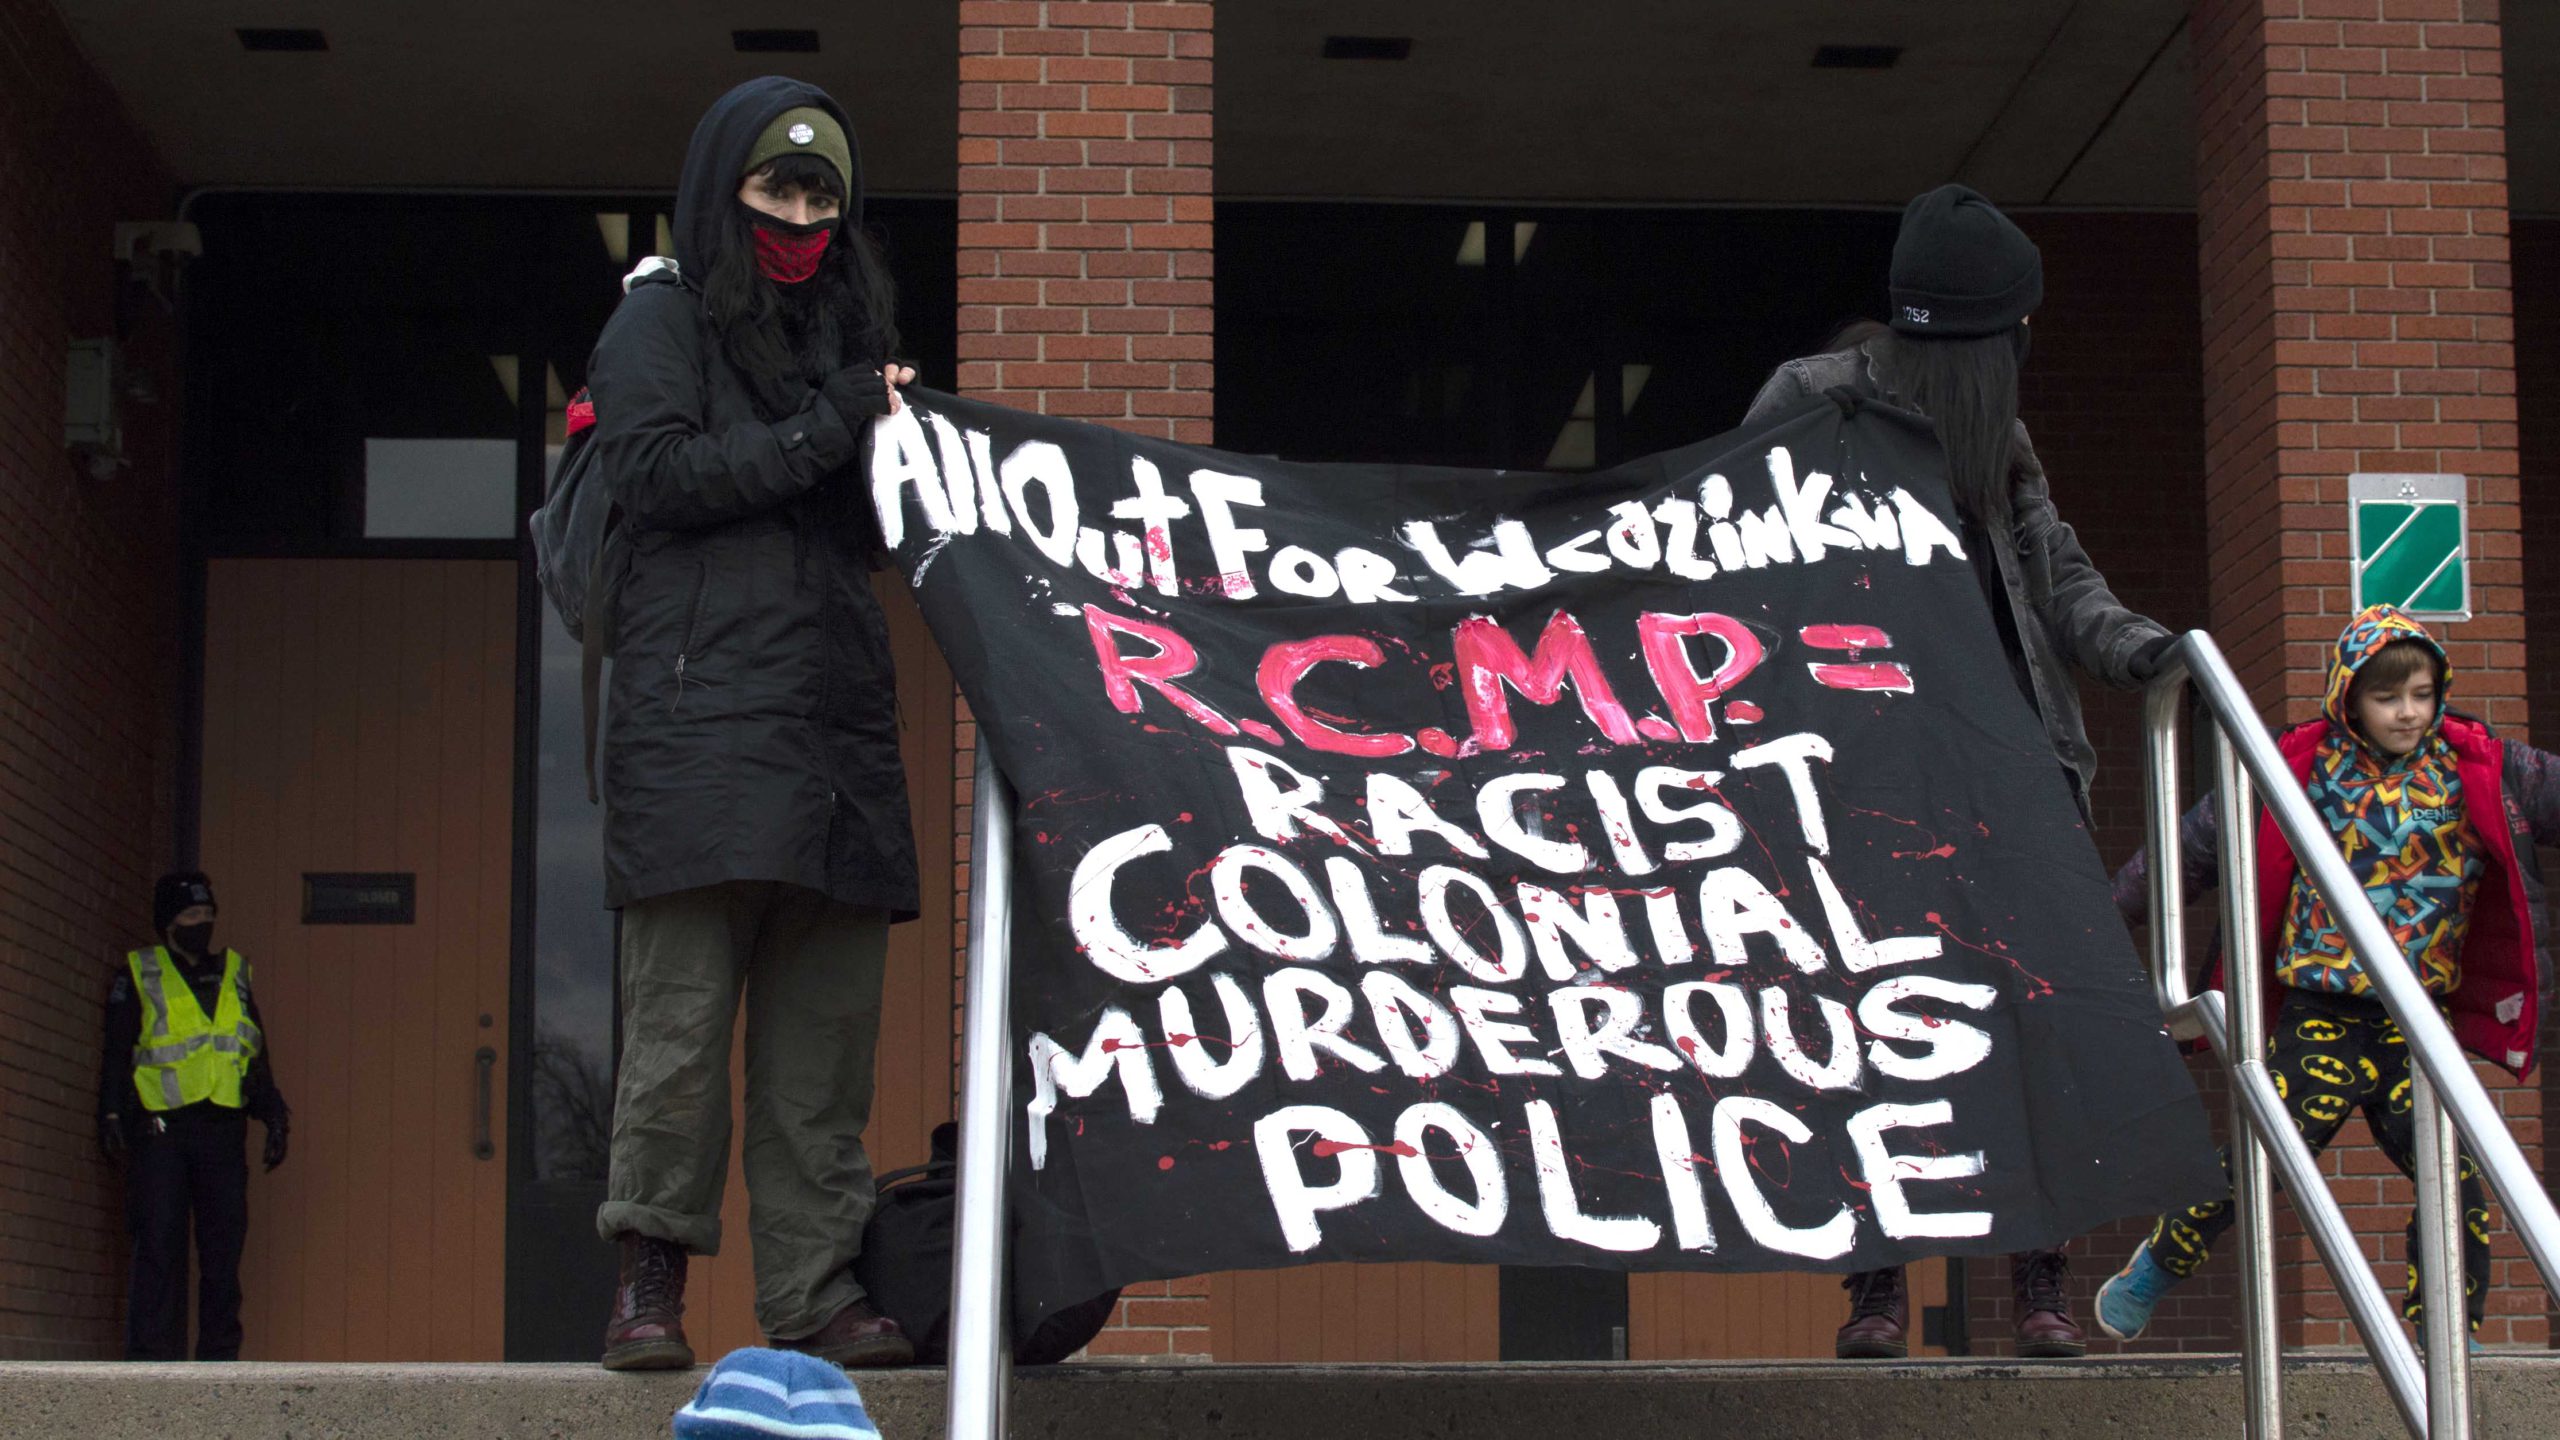 A police officer guards the entrance while demonstrators hold a sign that says "All out for Wedzin Kwa / RCMP = racist, colonial, murderous police" on the steps of the Halifax Regional Police headquarters on Nov. 21.